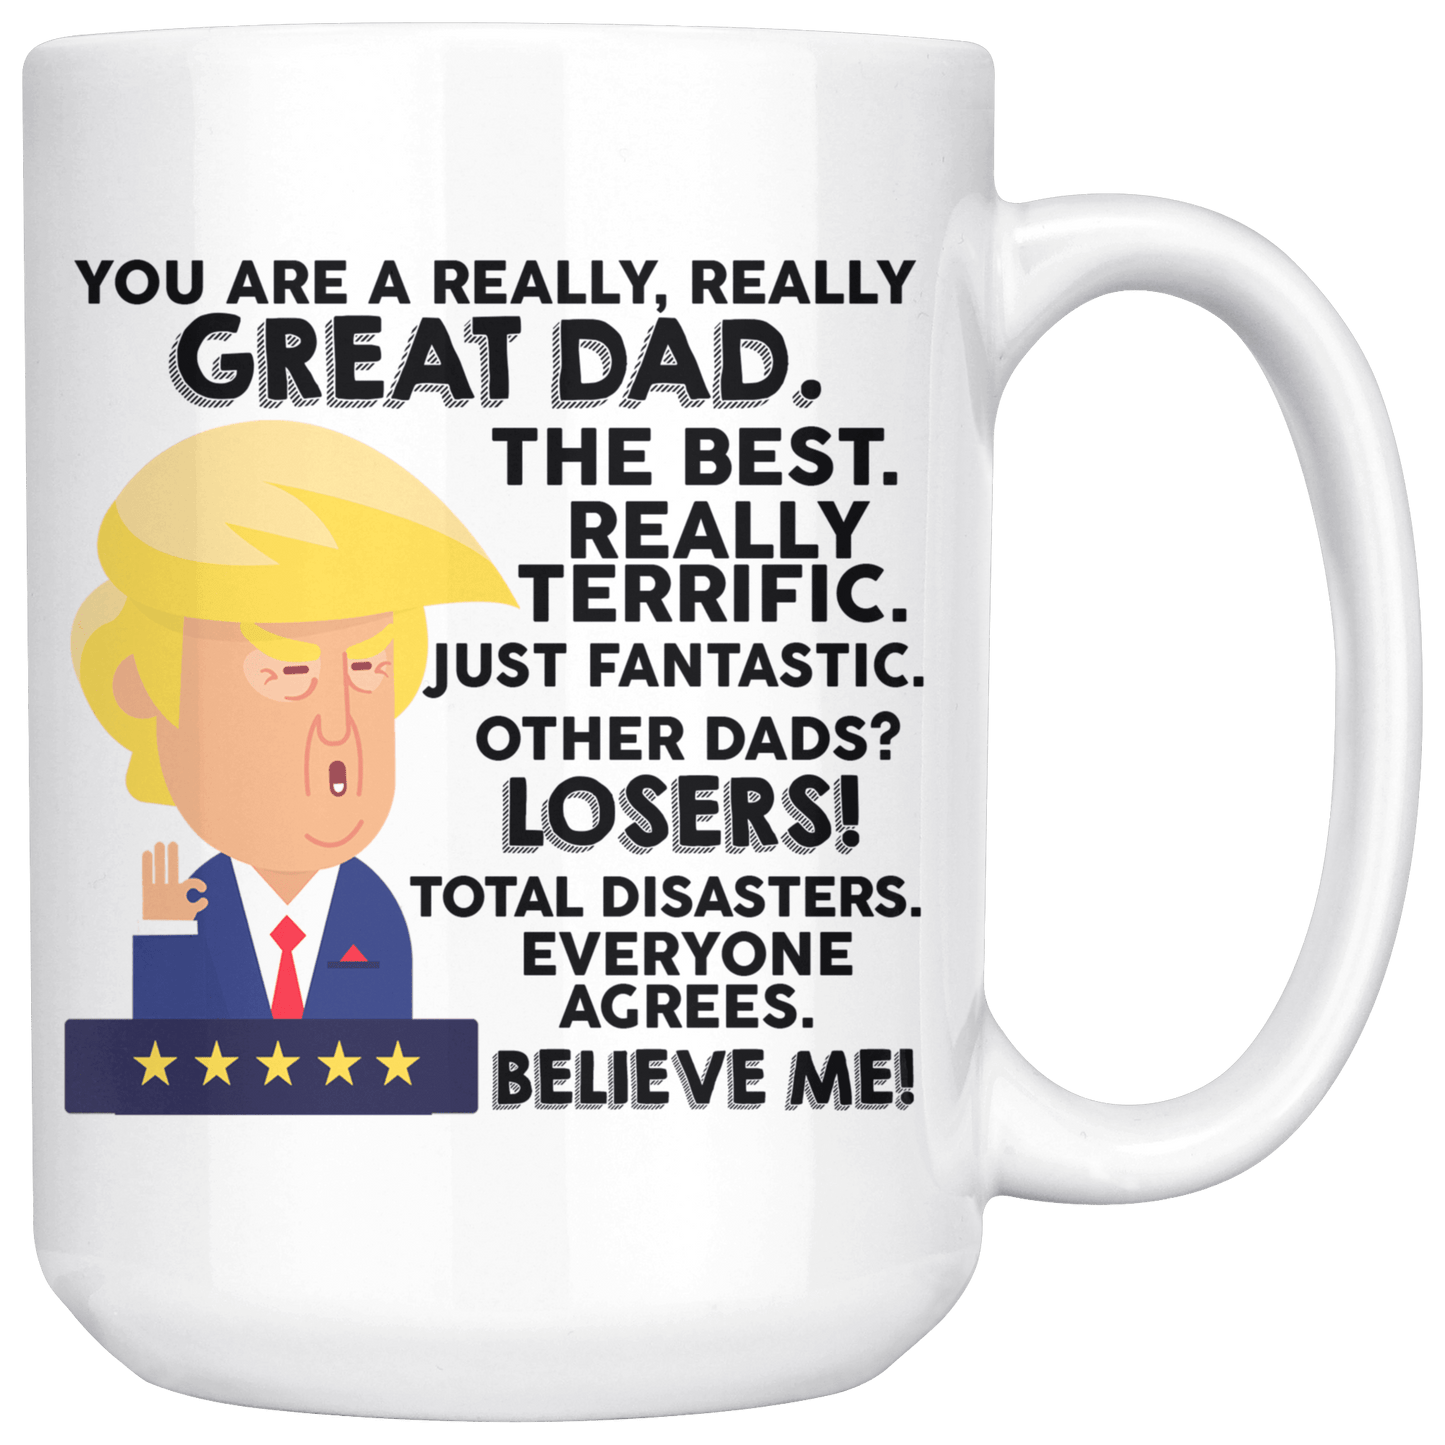 Really. You are a Great Dad - Mug